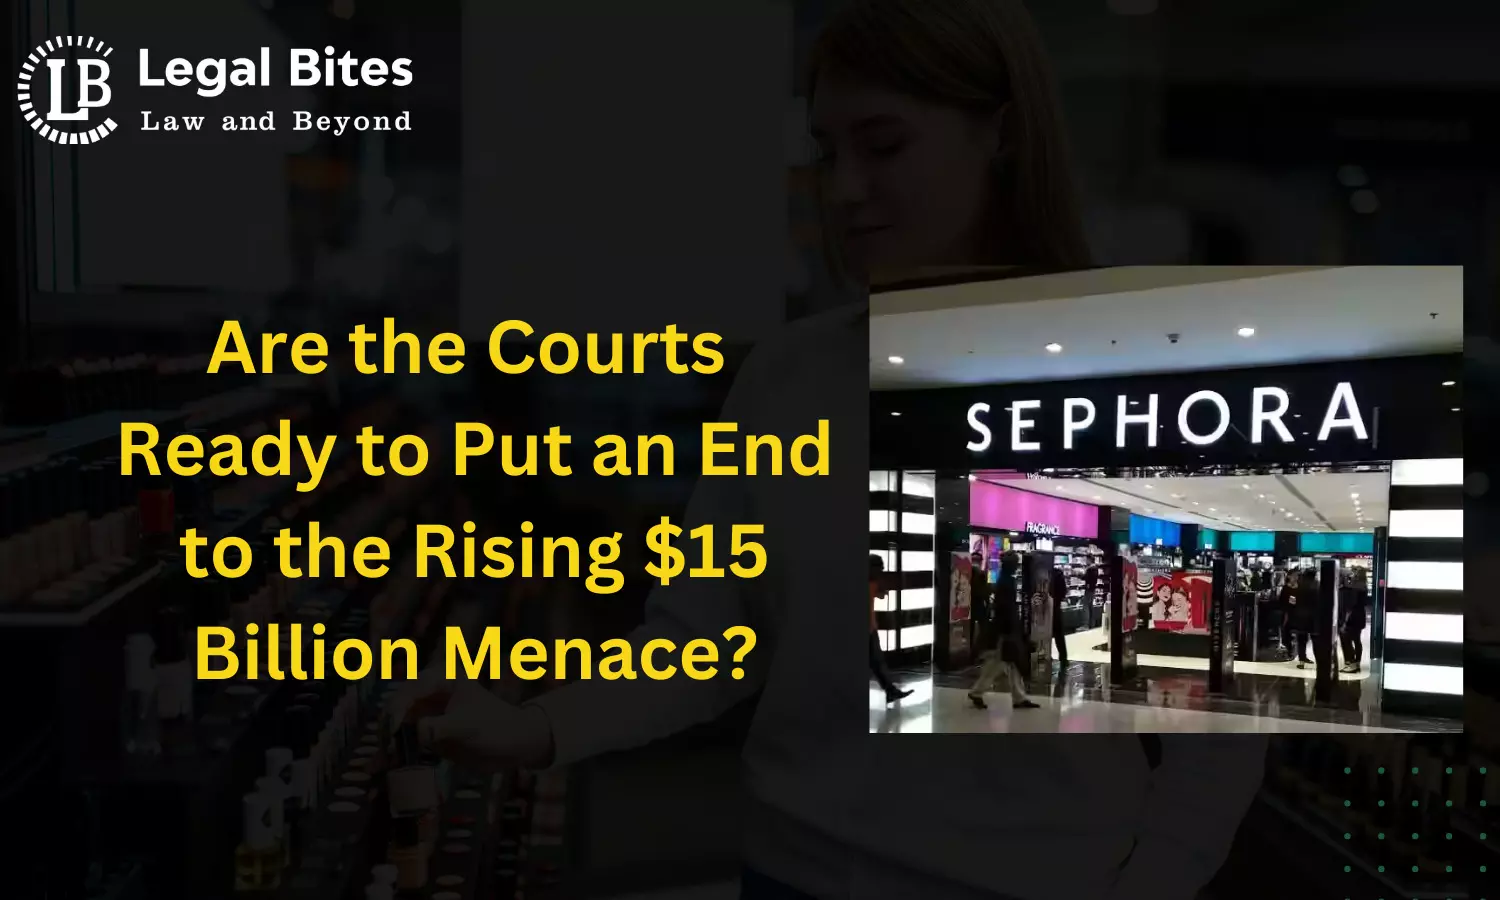 Are the Courts Ready to Put an End to the Rising $15 Billion Menace?